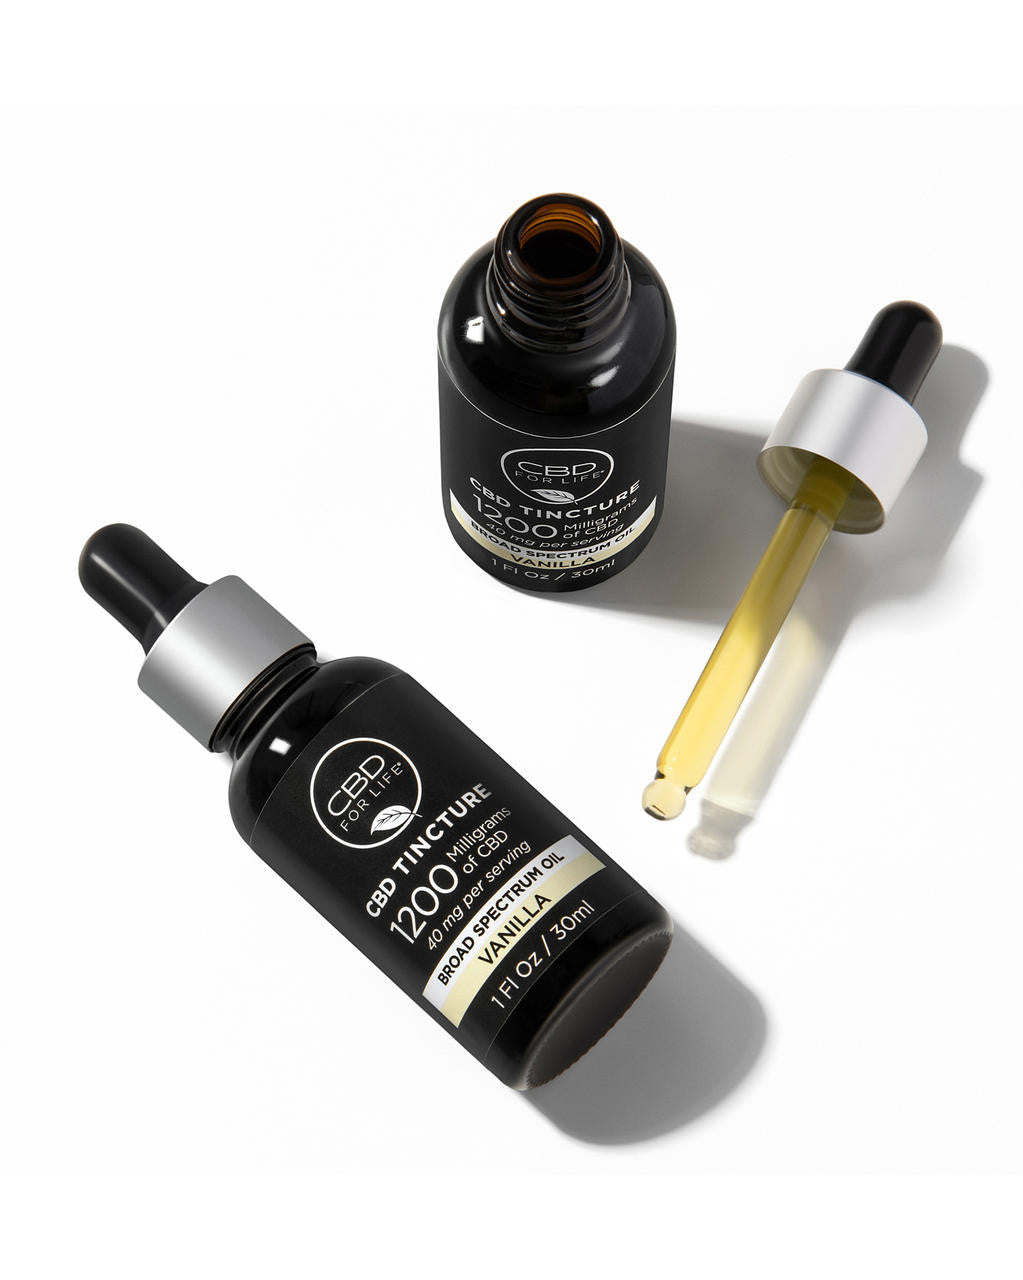 Many people have told us they’ve turned to CBD for help as it relates to immune health, stress, worry and anxiety. And rightfully so: the benefits of Broad Spectrum CBD Oil can help relieve all of the above gently and effectively